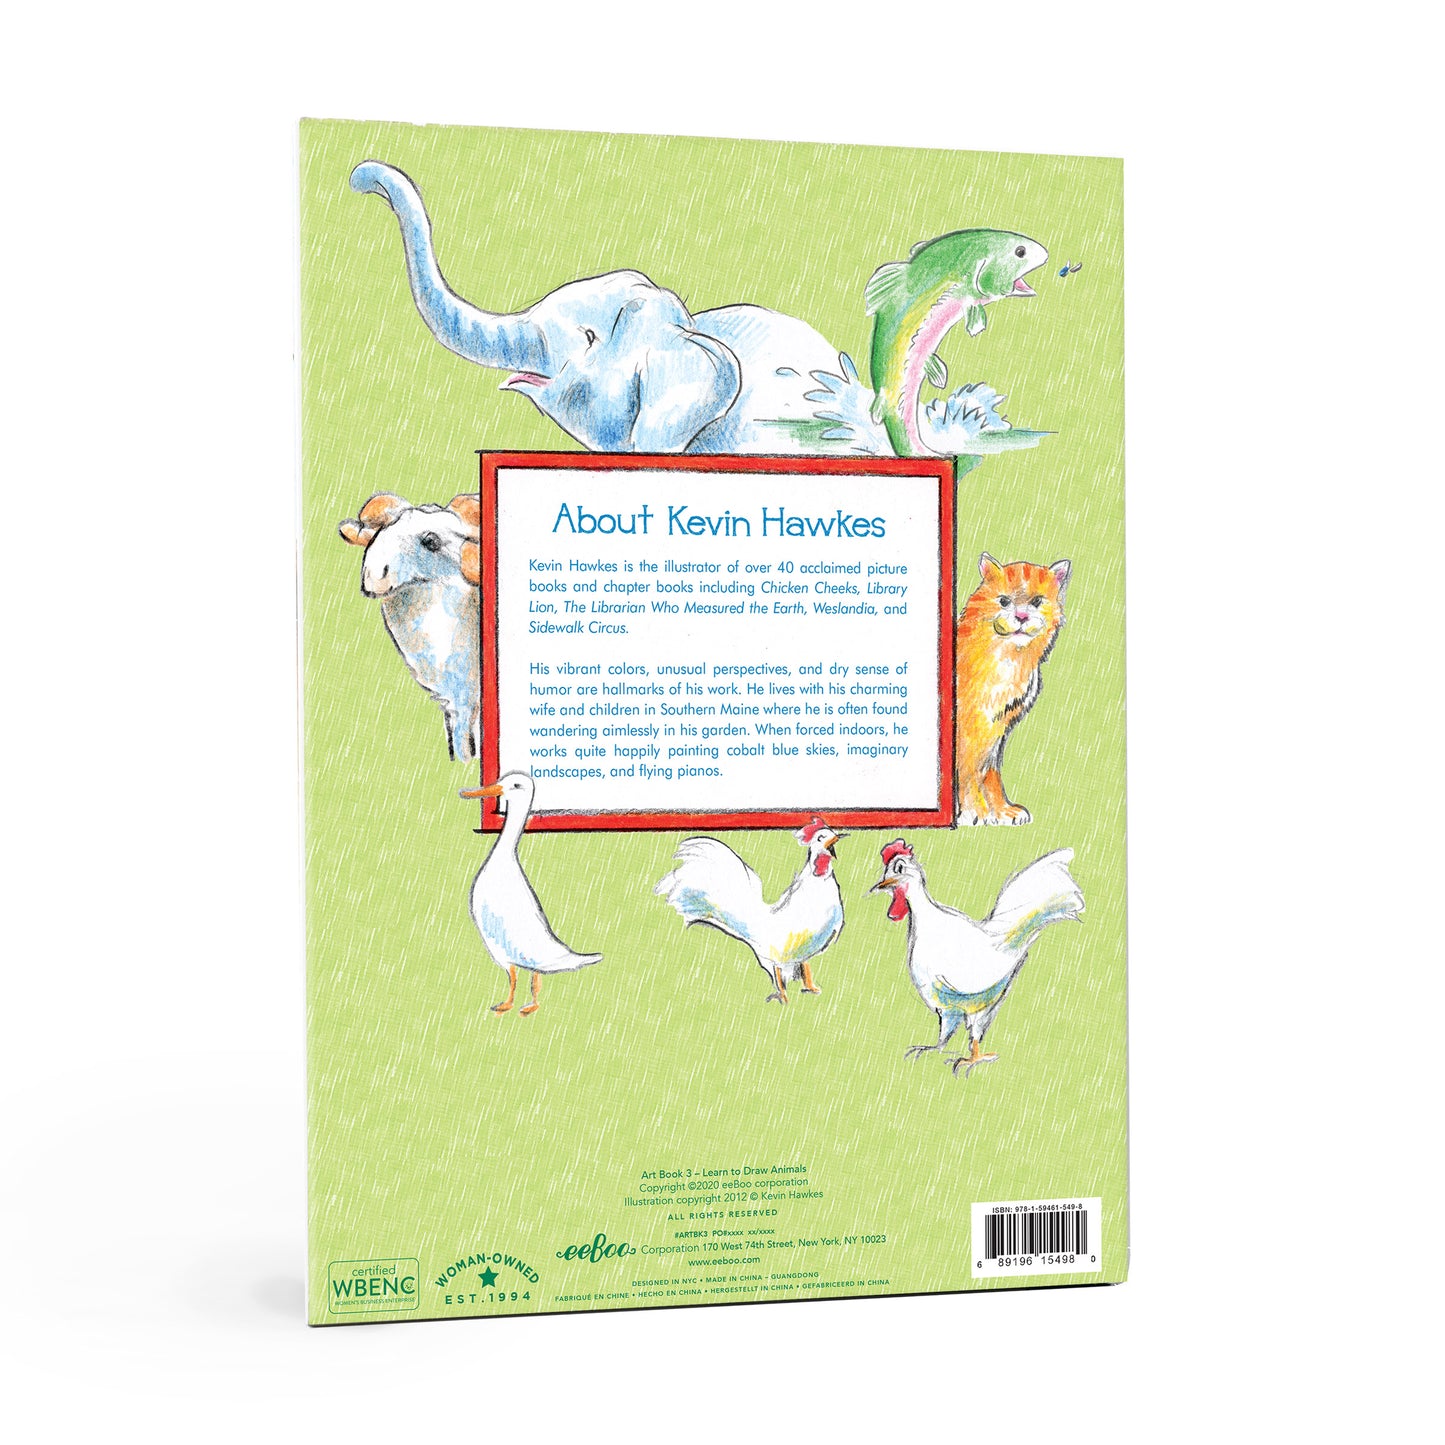 Learn to Draw Animals Book with Kevin Hawkes | eeBoo Gifts for Kids 7+